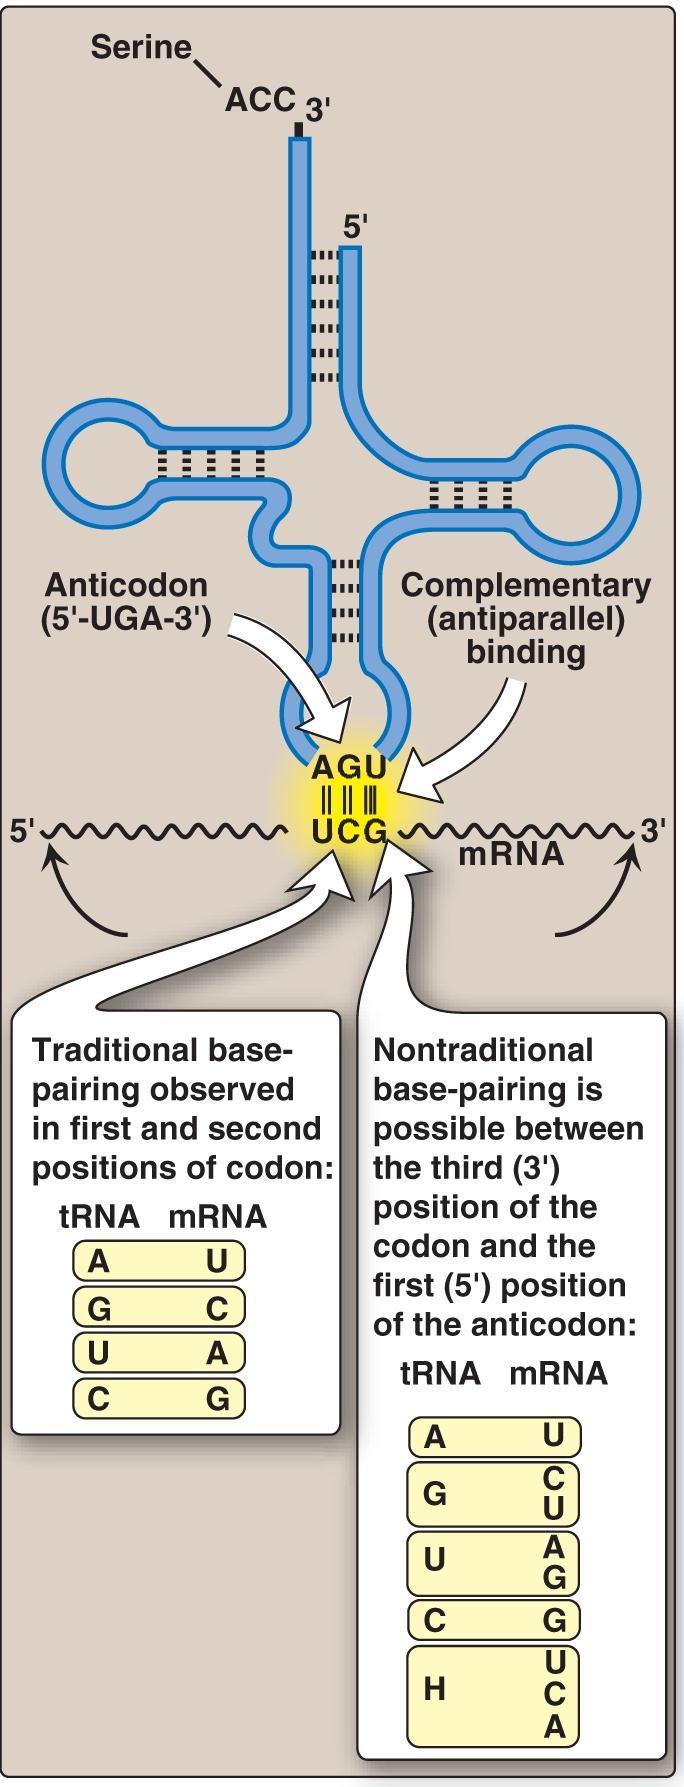 Protein Synthesis IV. CODON RECOGNITION BY trna A. Antiparallel binding between codon and anticodon antiparallel binding of the trna anticodon to the mrna codon.